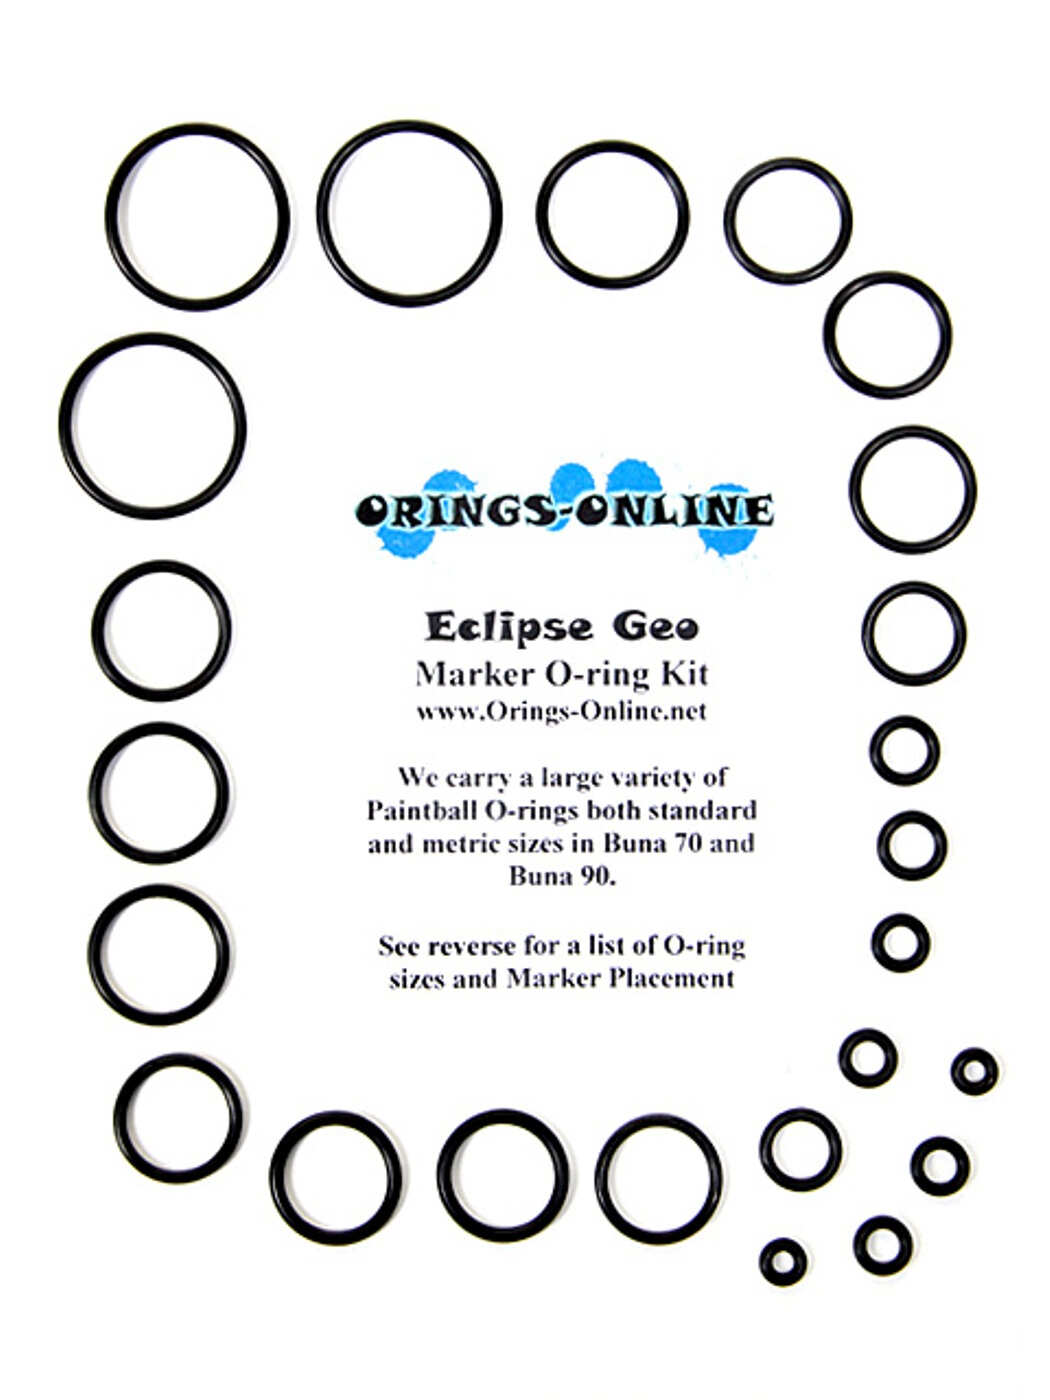 Planet Eclipse Geo Marker O-ring Kit